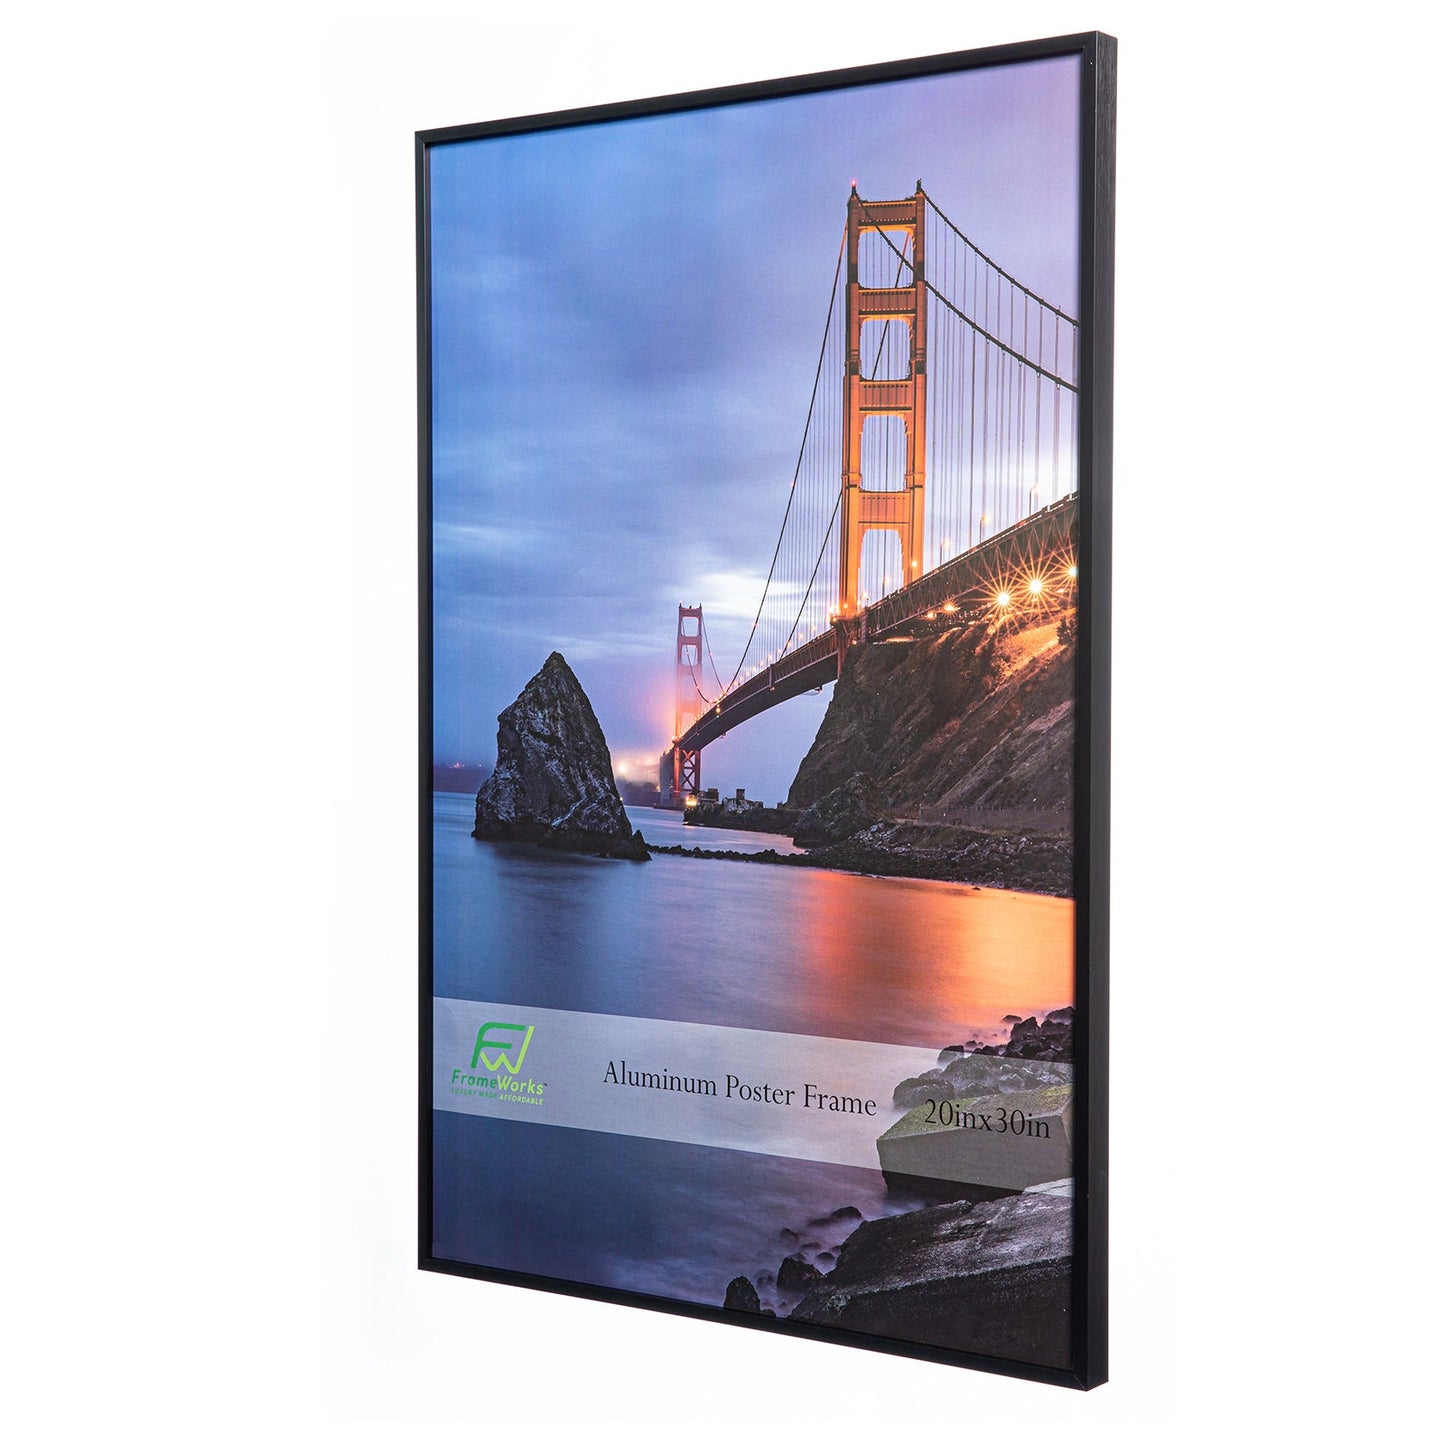 20" x 30" Black Brushed Aluminum Poster Picture Frame with Plexiglass